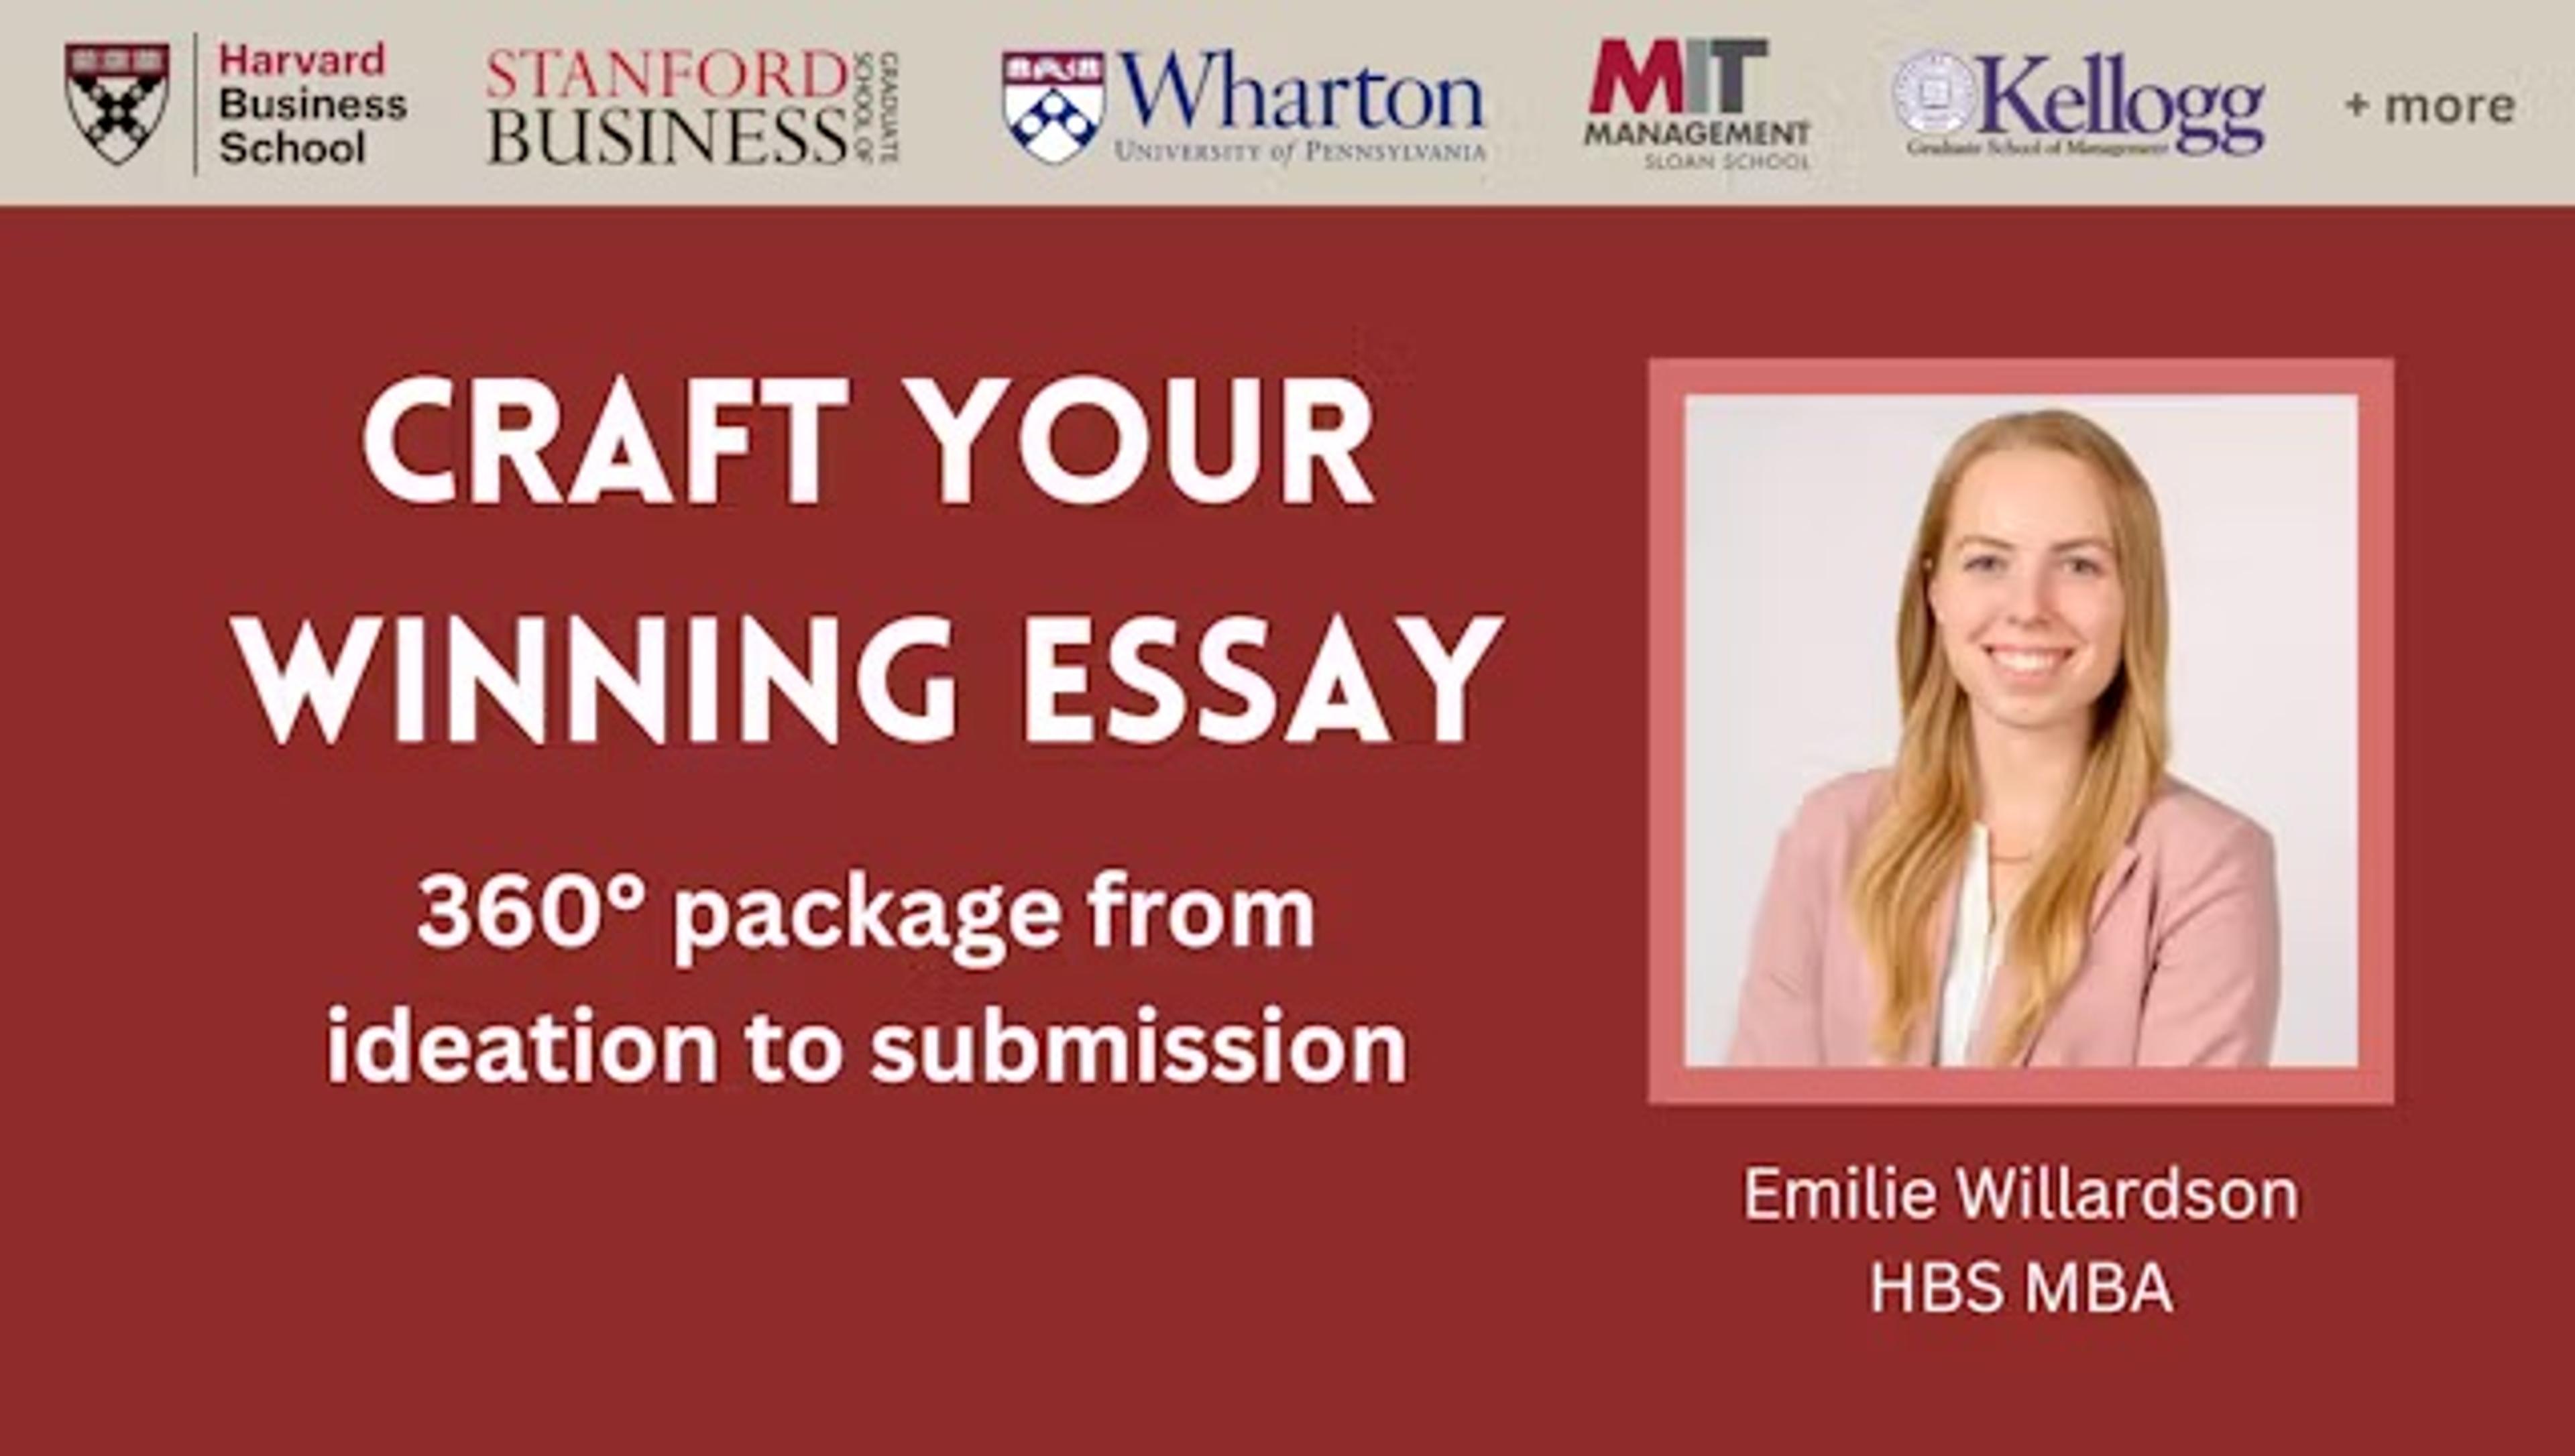 why are essay writing services becoming a growing business